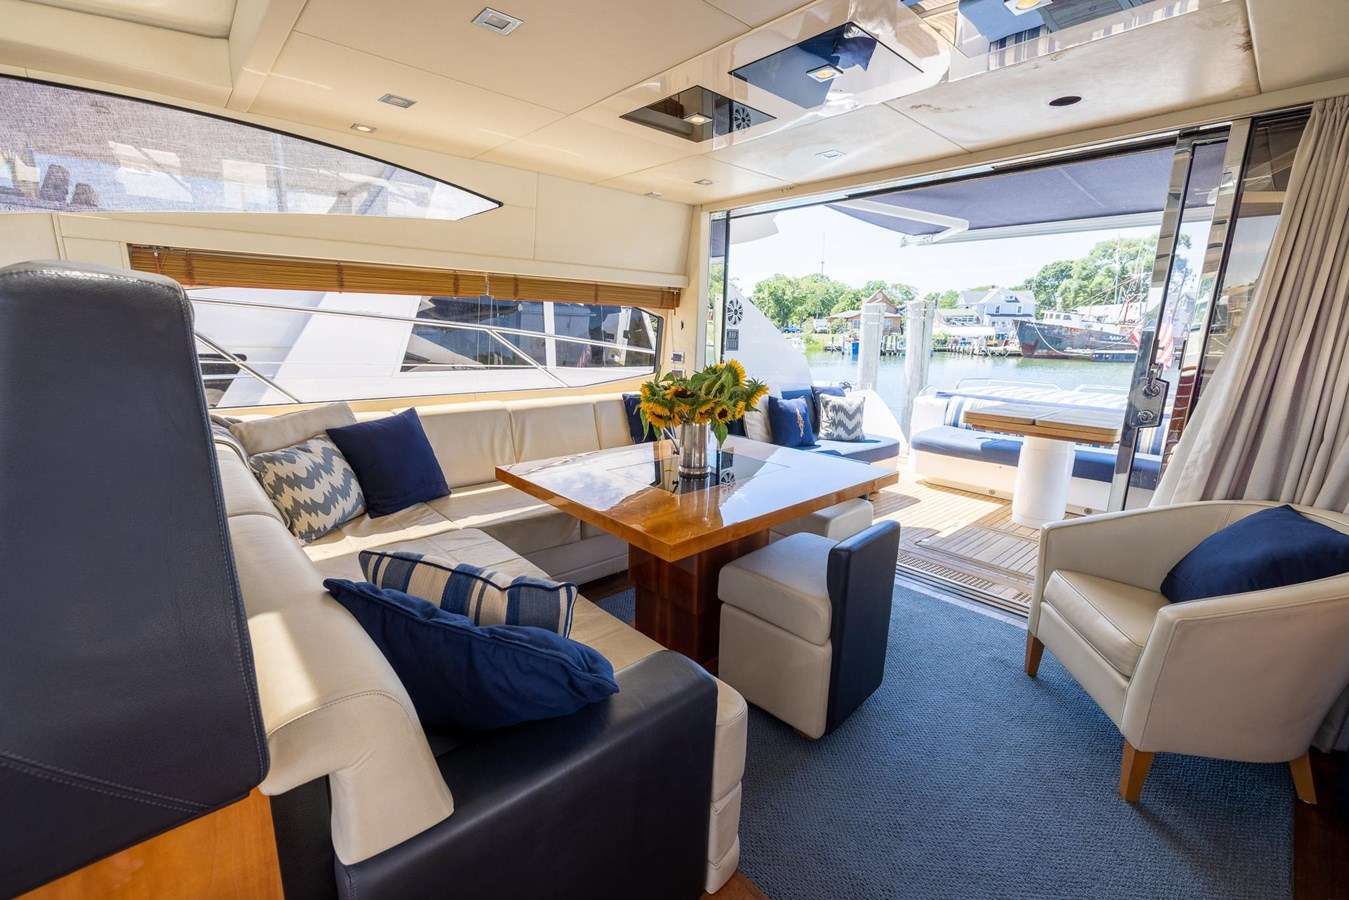 CASA SUL MARE - Yacht Charter New England & Boat hire in Summer: USA - New England | Winter: USA - Florida East Coast 2